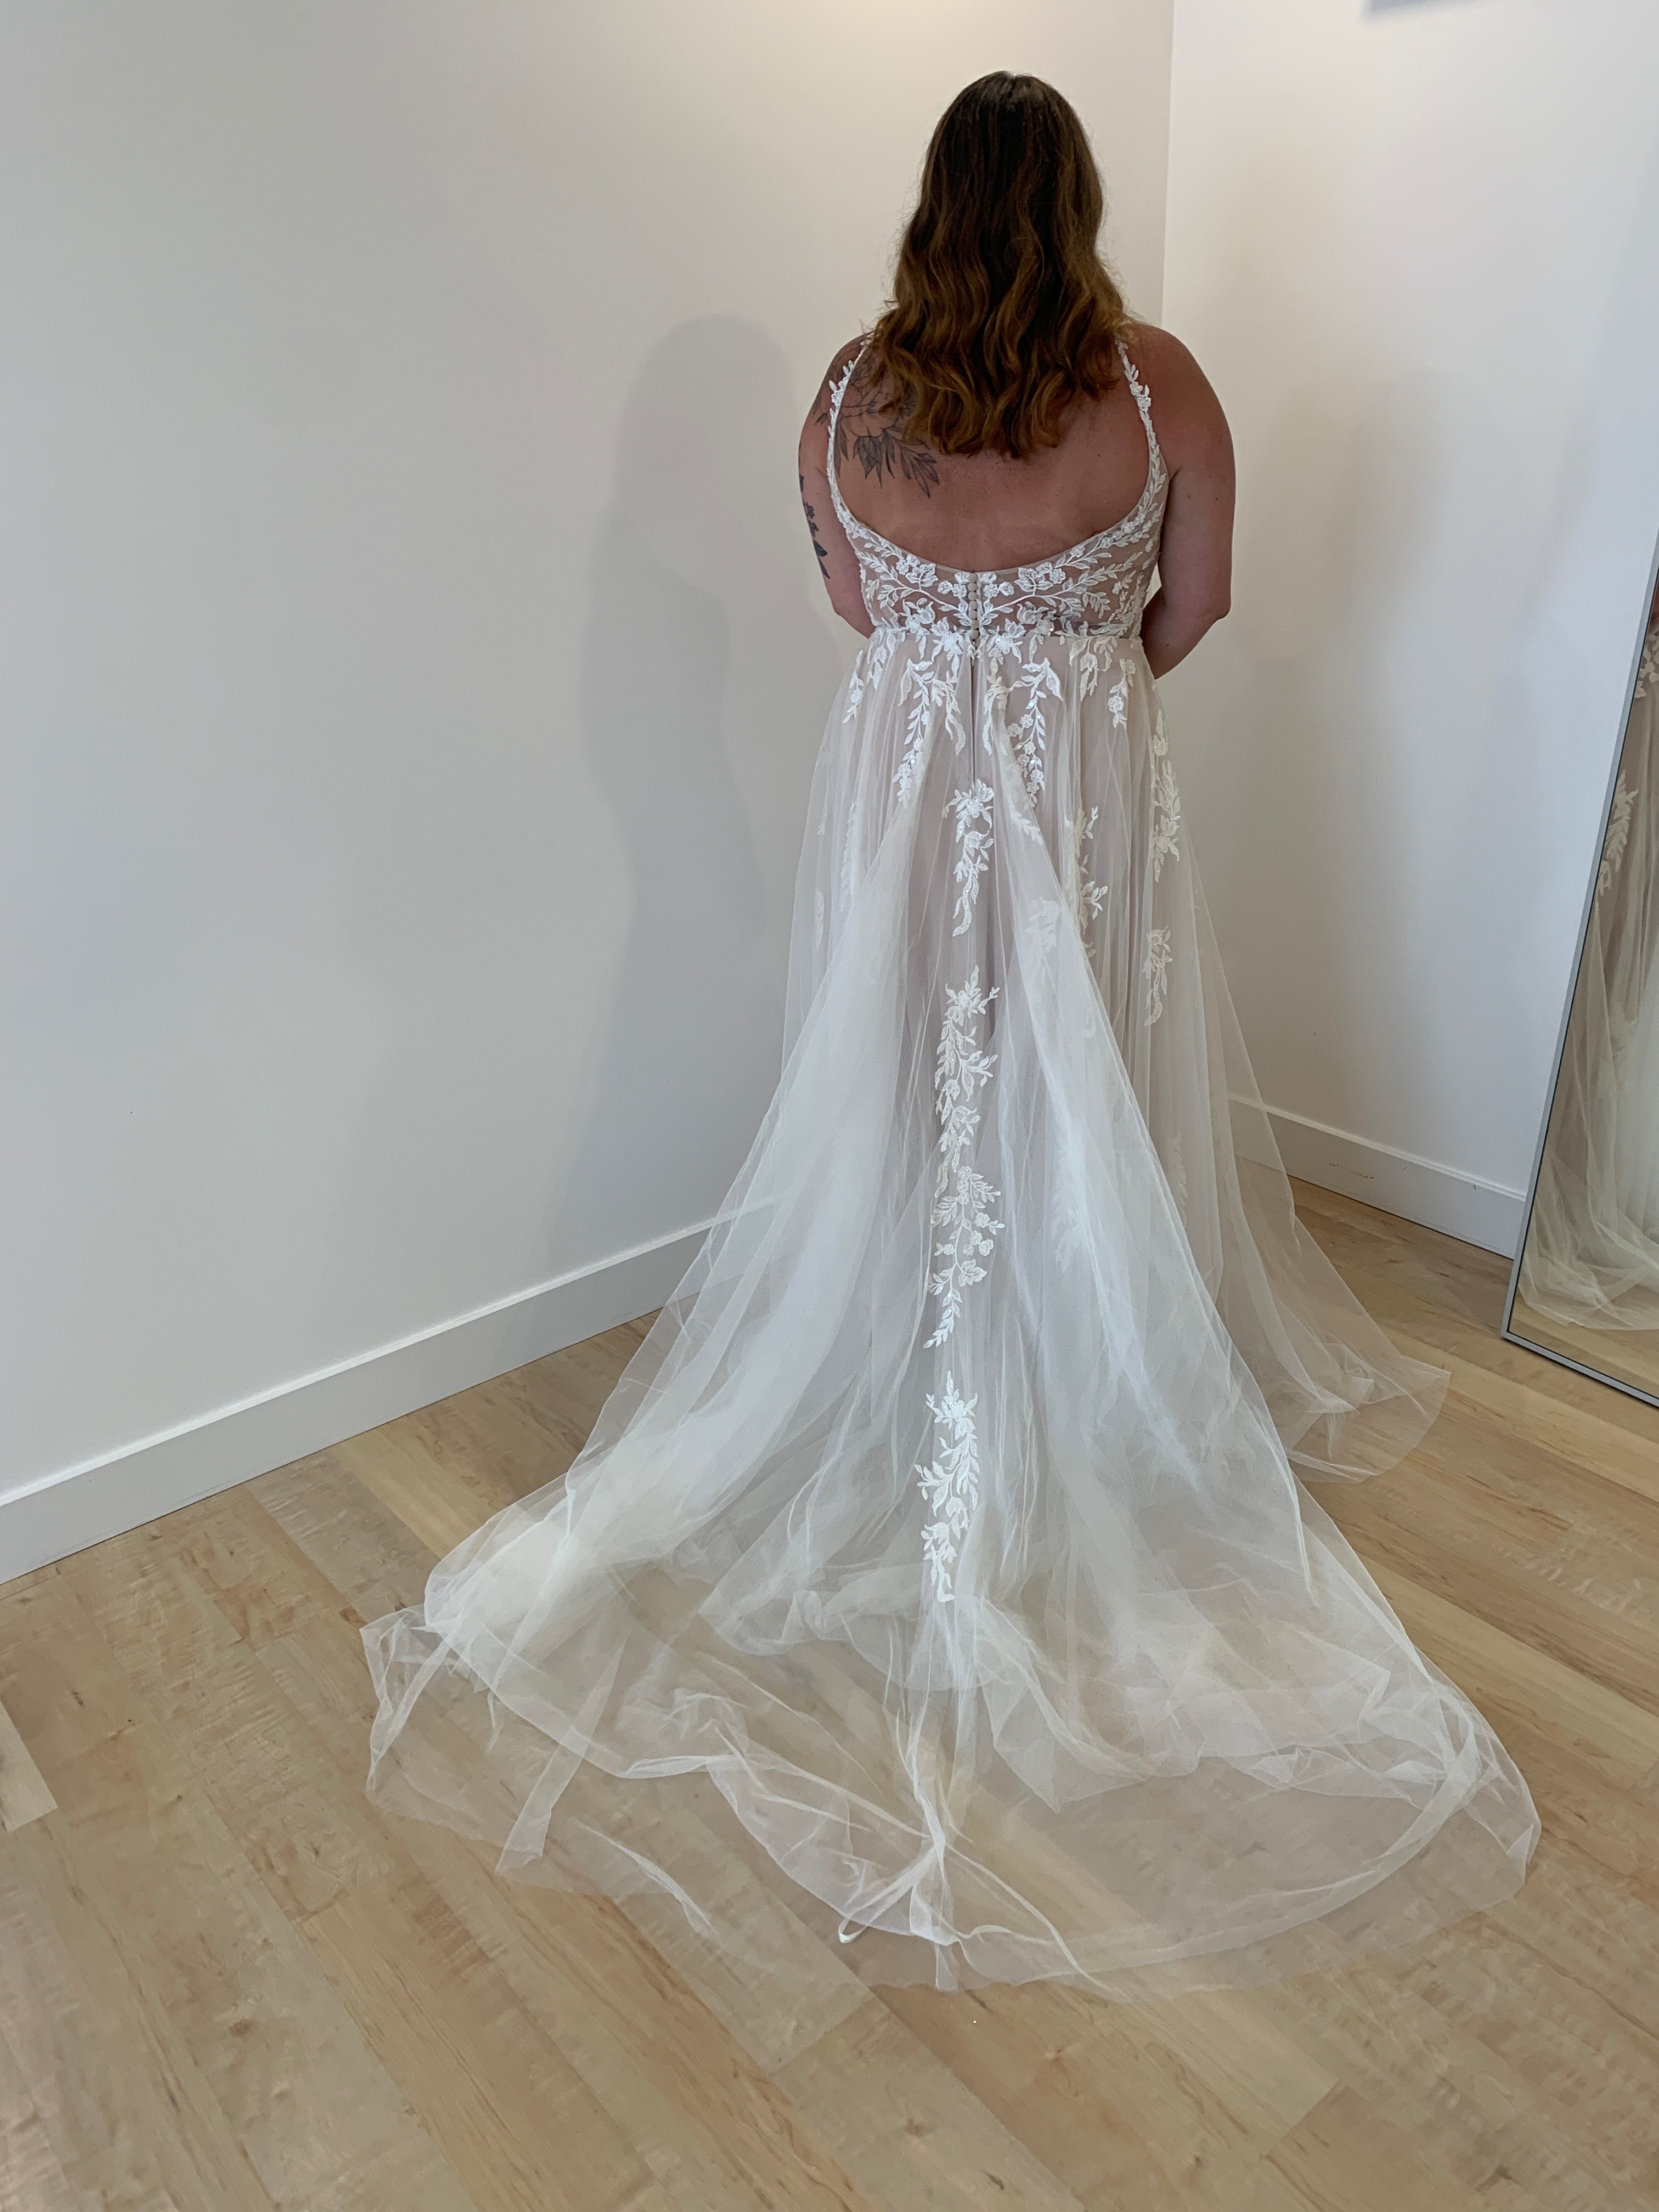 *EXCLUSIVE* Angus *samples size 14 and size 18* - romantic lace boho dress with embroidered top and lace straps